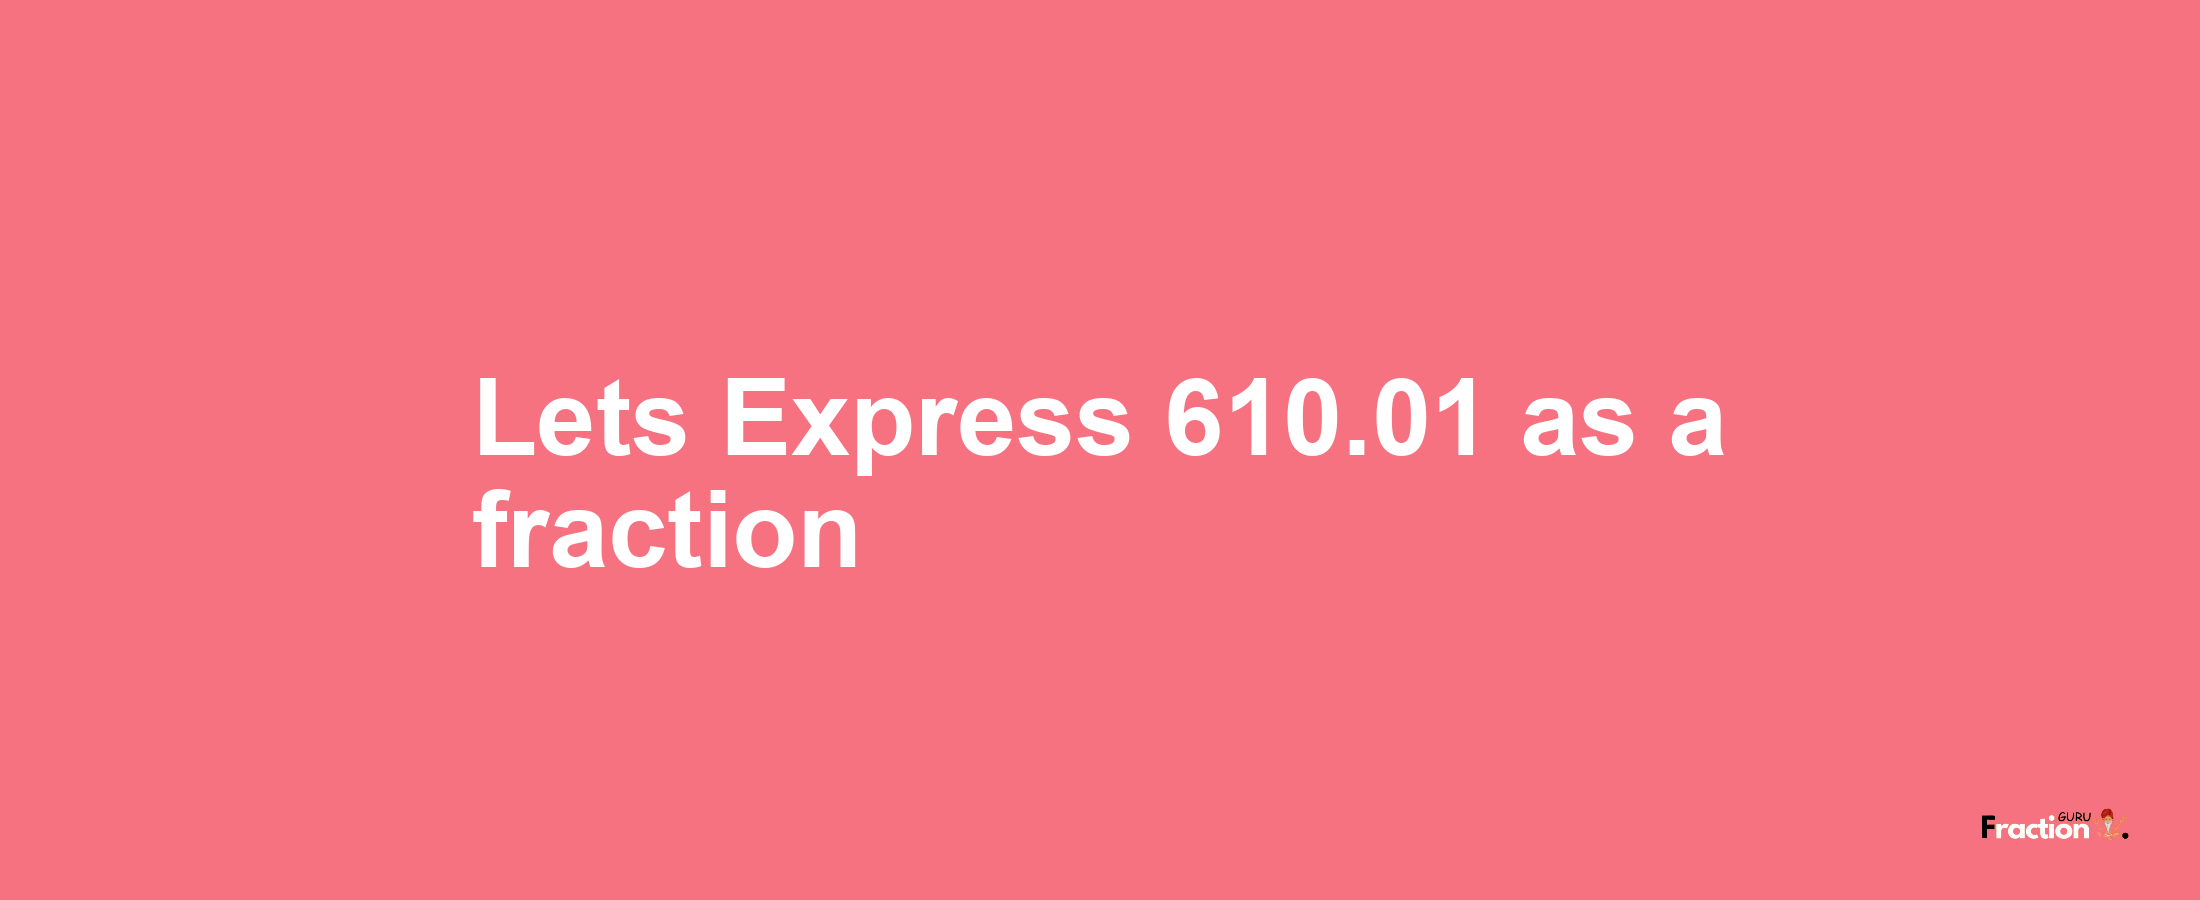 Lets Express 610.01 as afraction